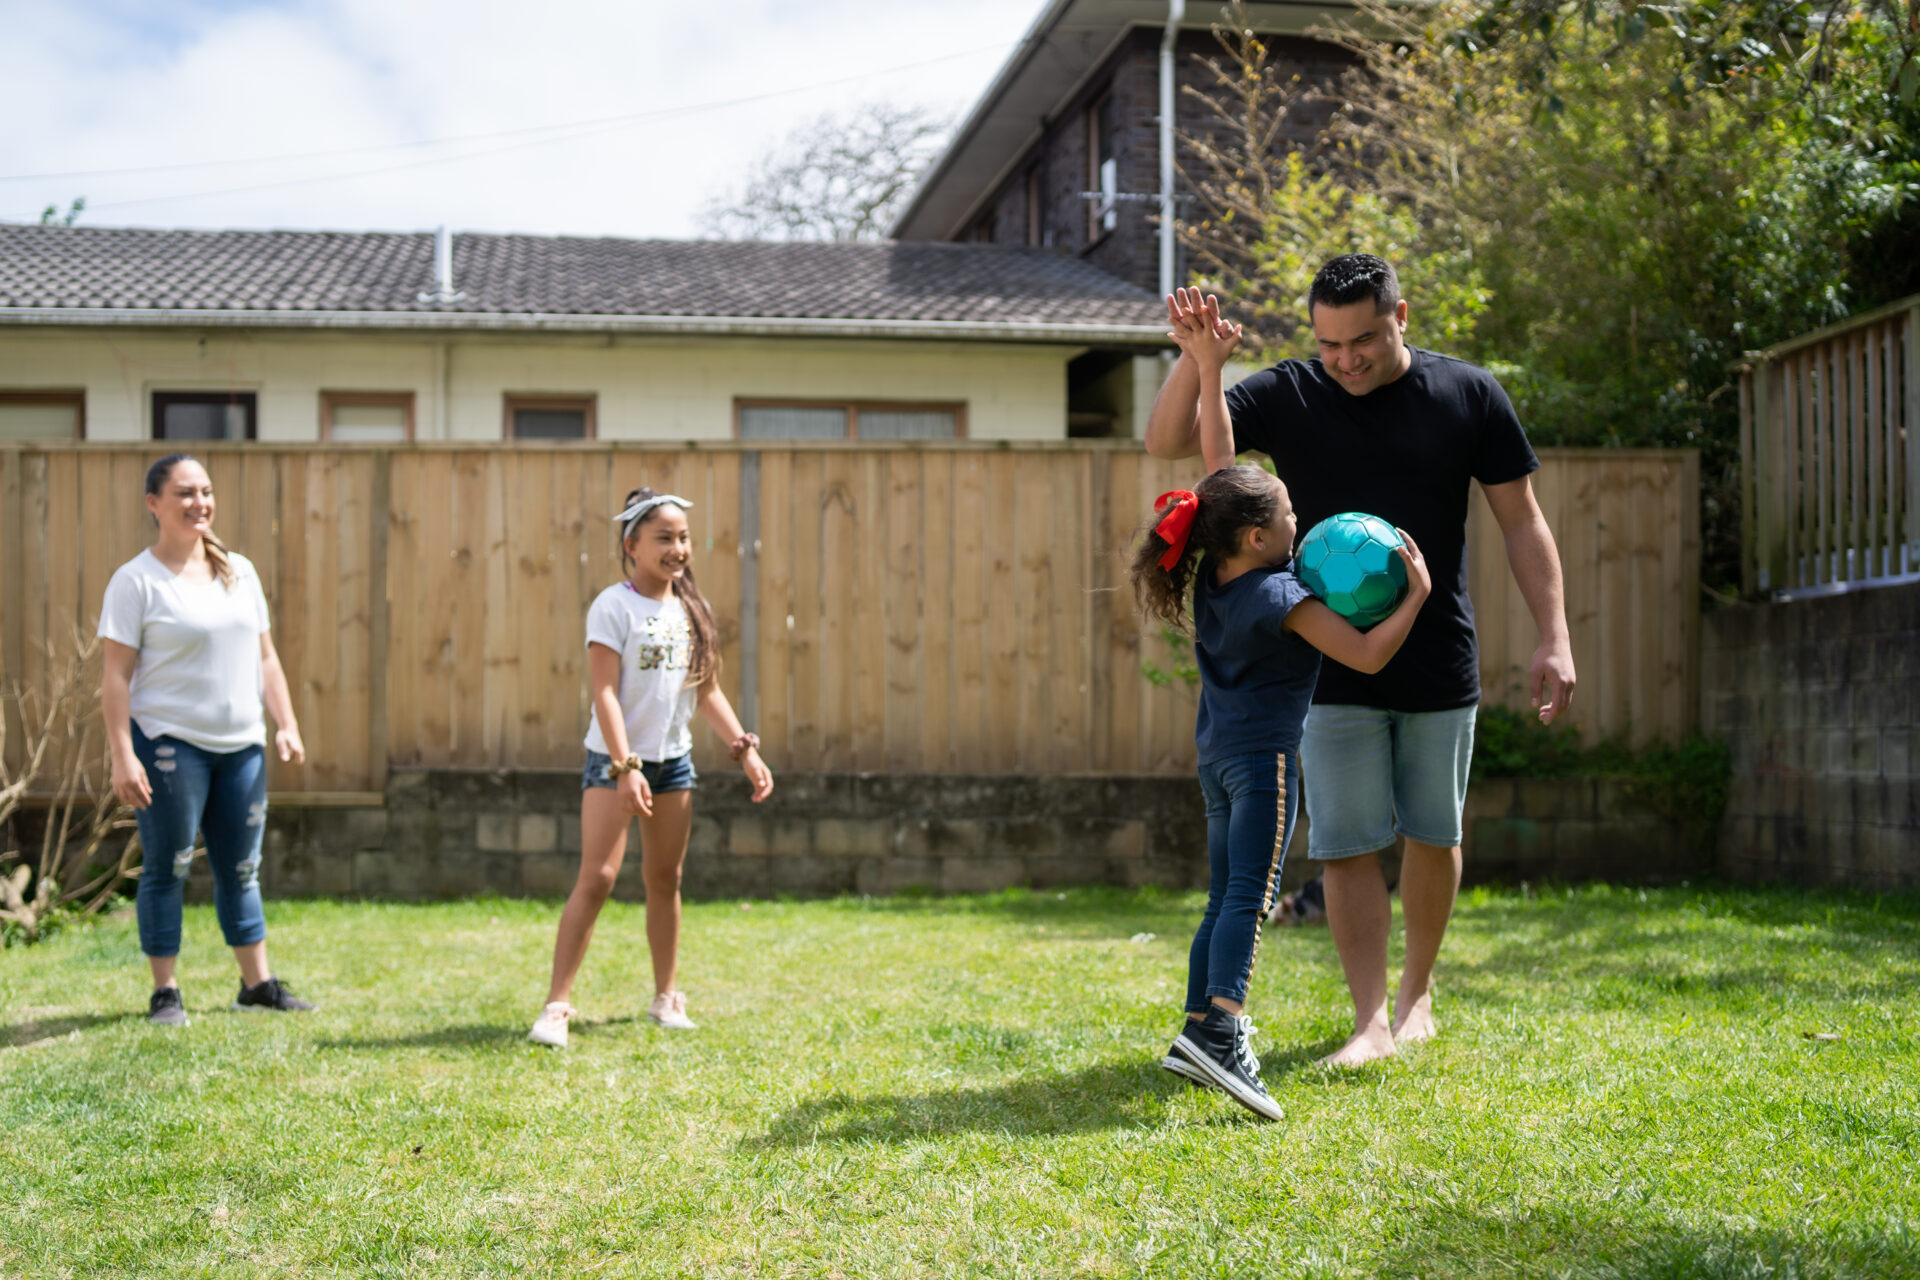 Two adults and several children play in a backyard